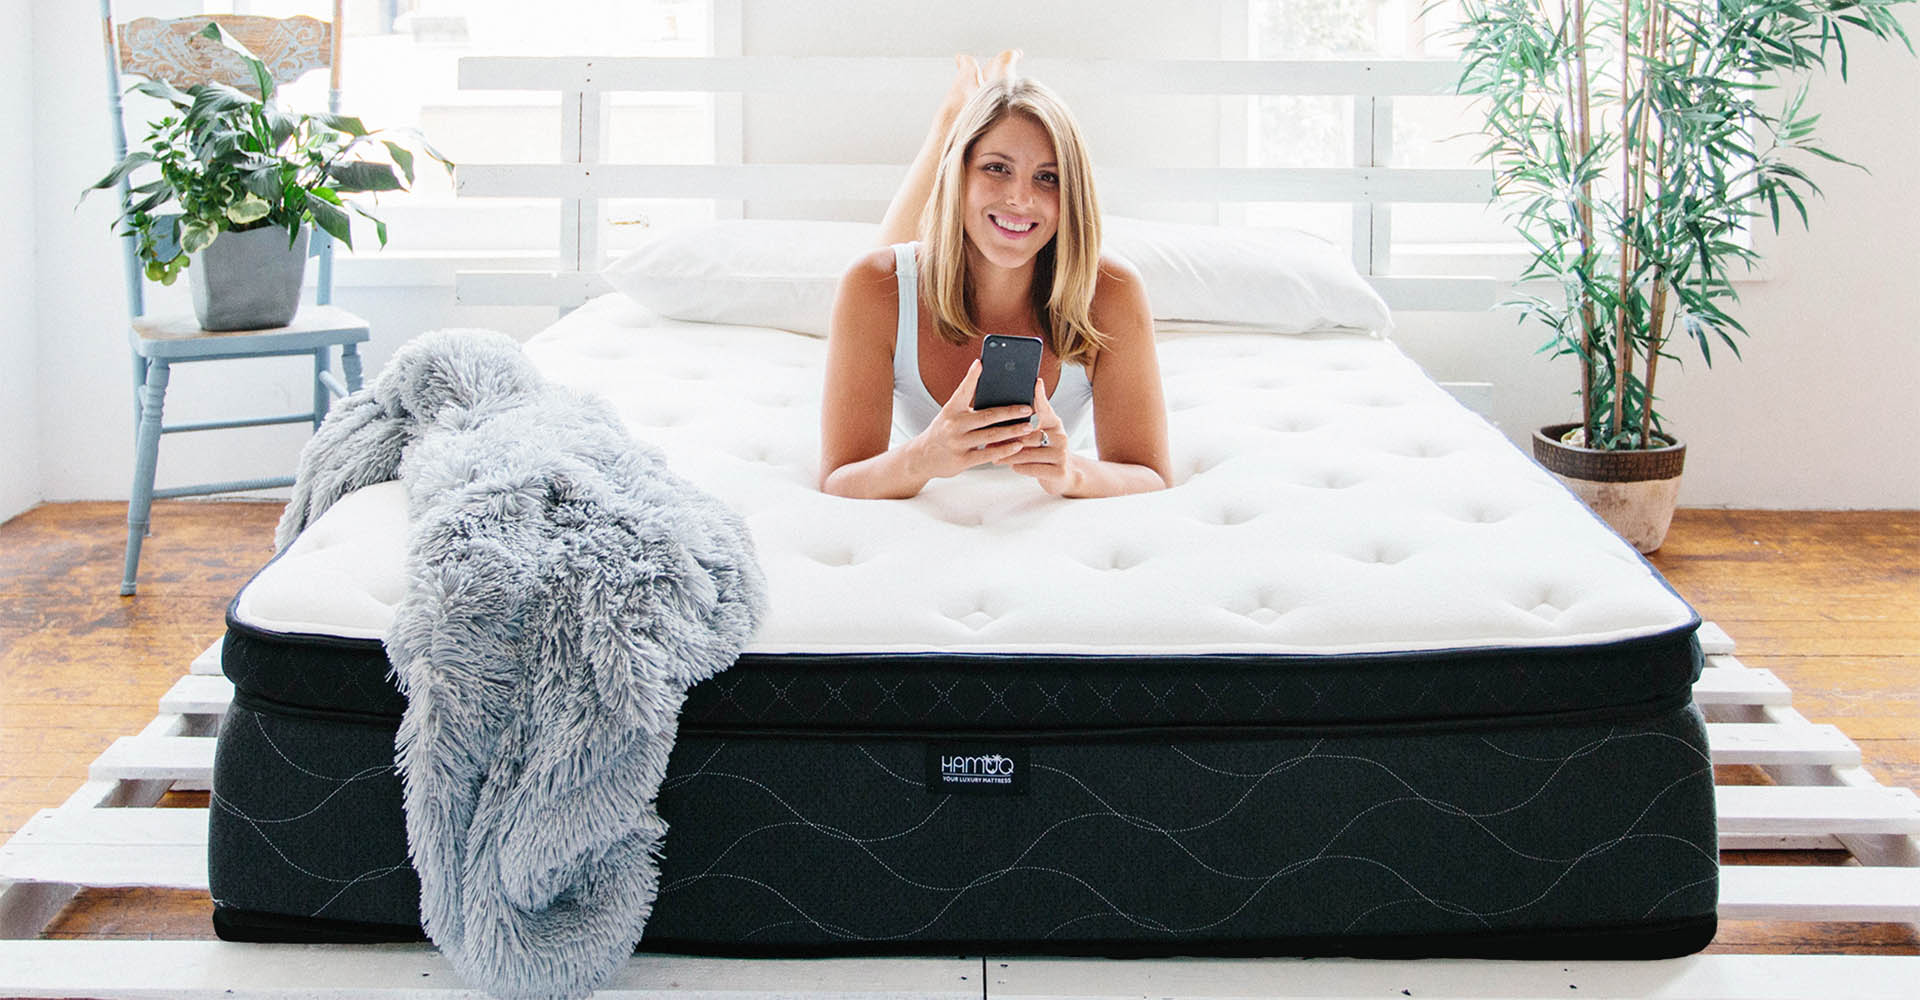 Which box mattress has the best bounce?